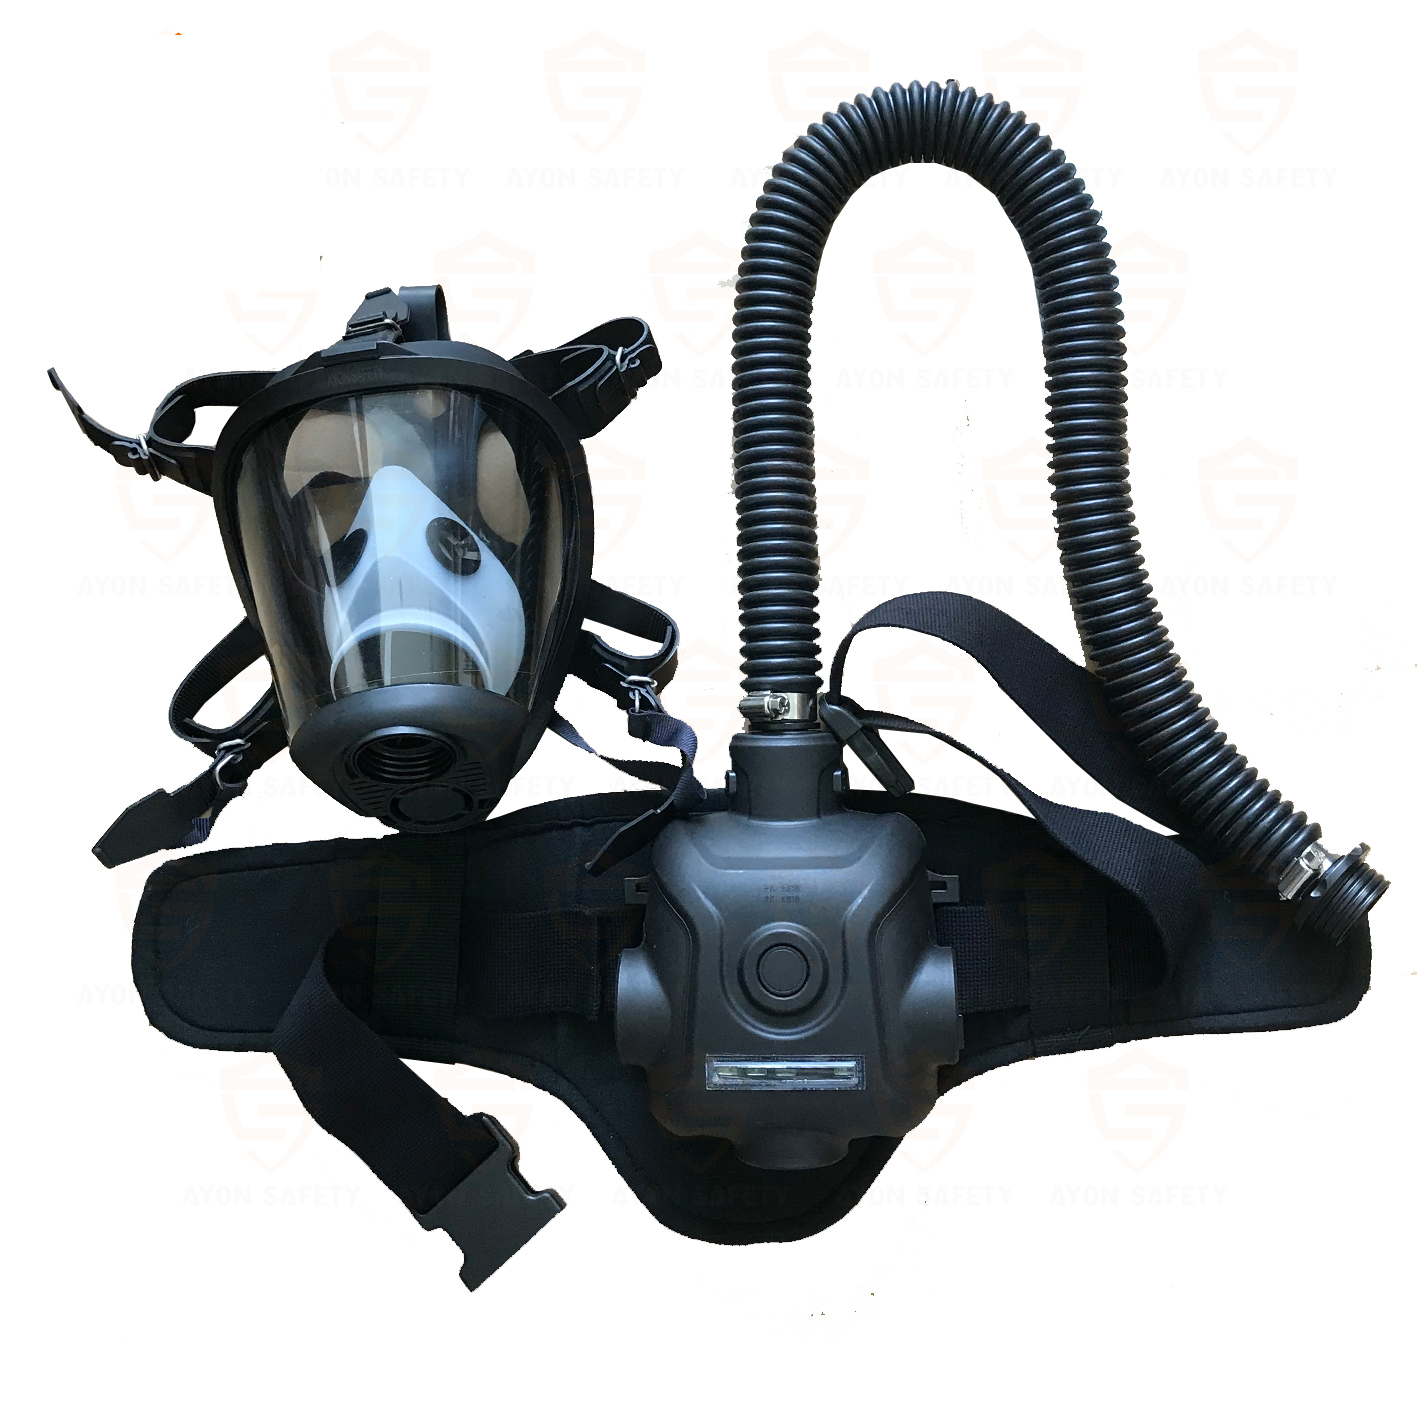 KLSK / The KL99-PAPR is a battery-powered fan that together with a filter and an approved head top, is included in the fan-assisted respiratory protective device systems.